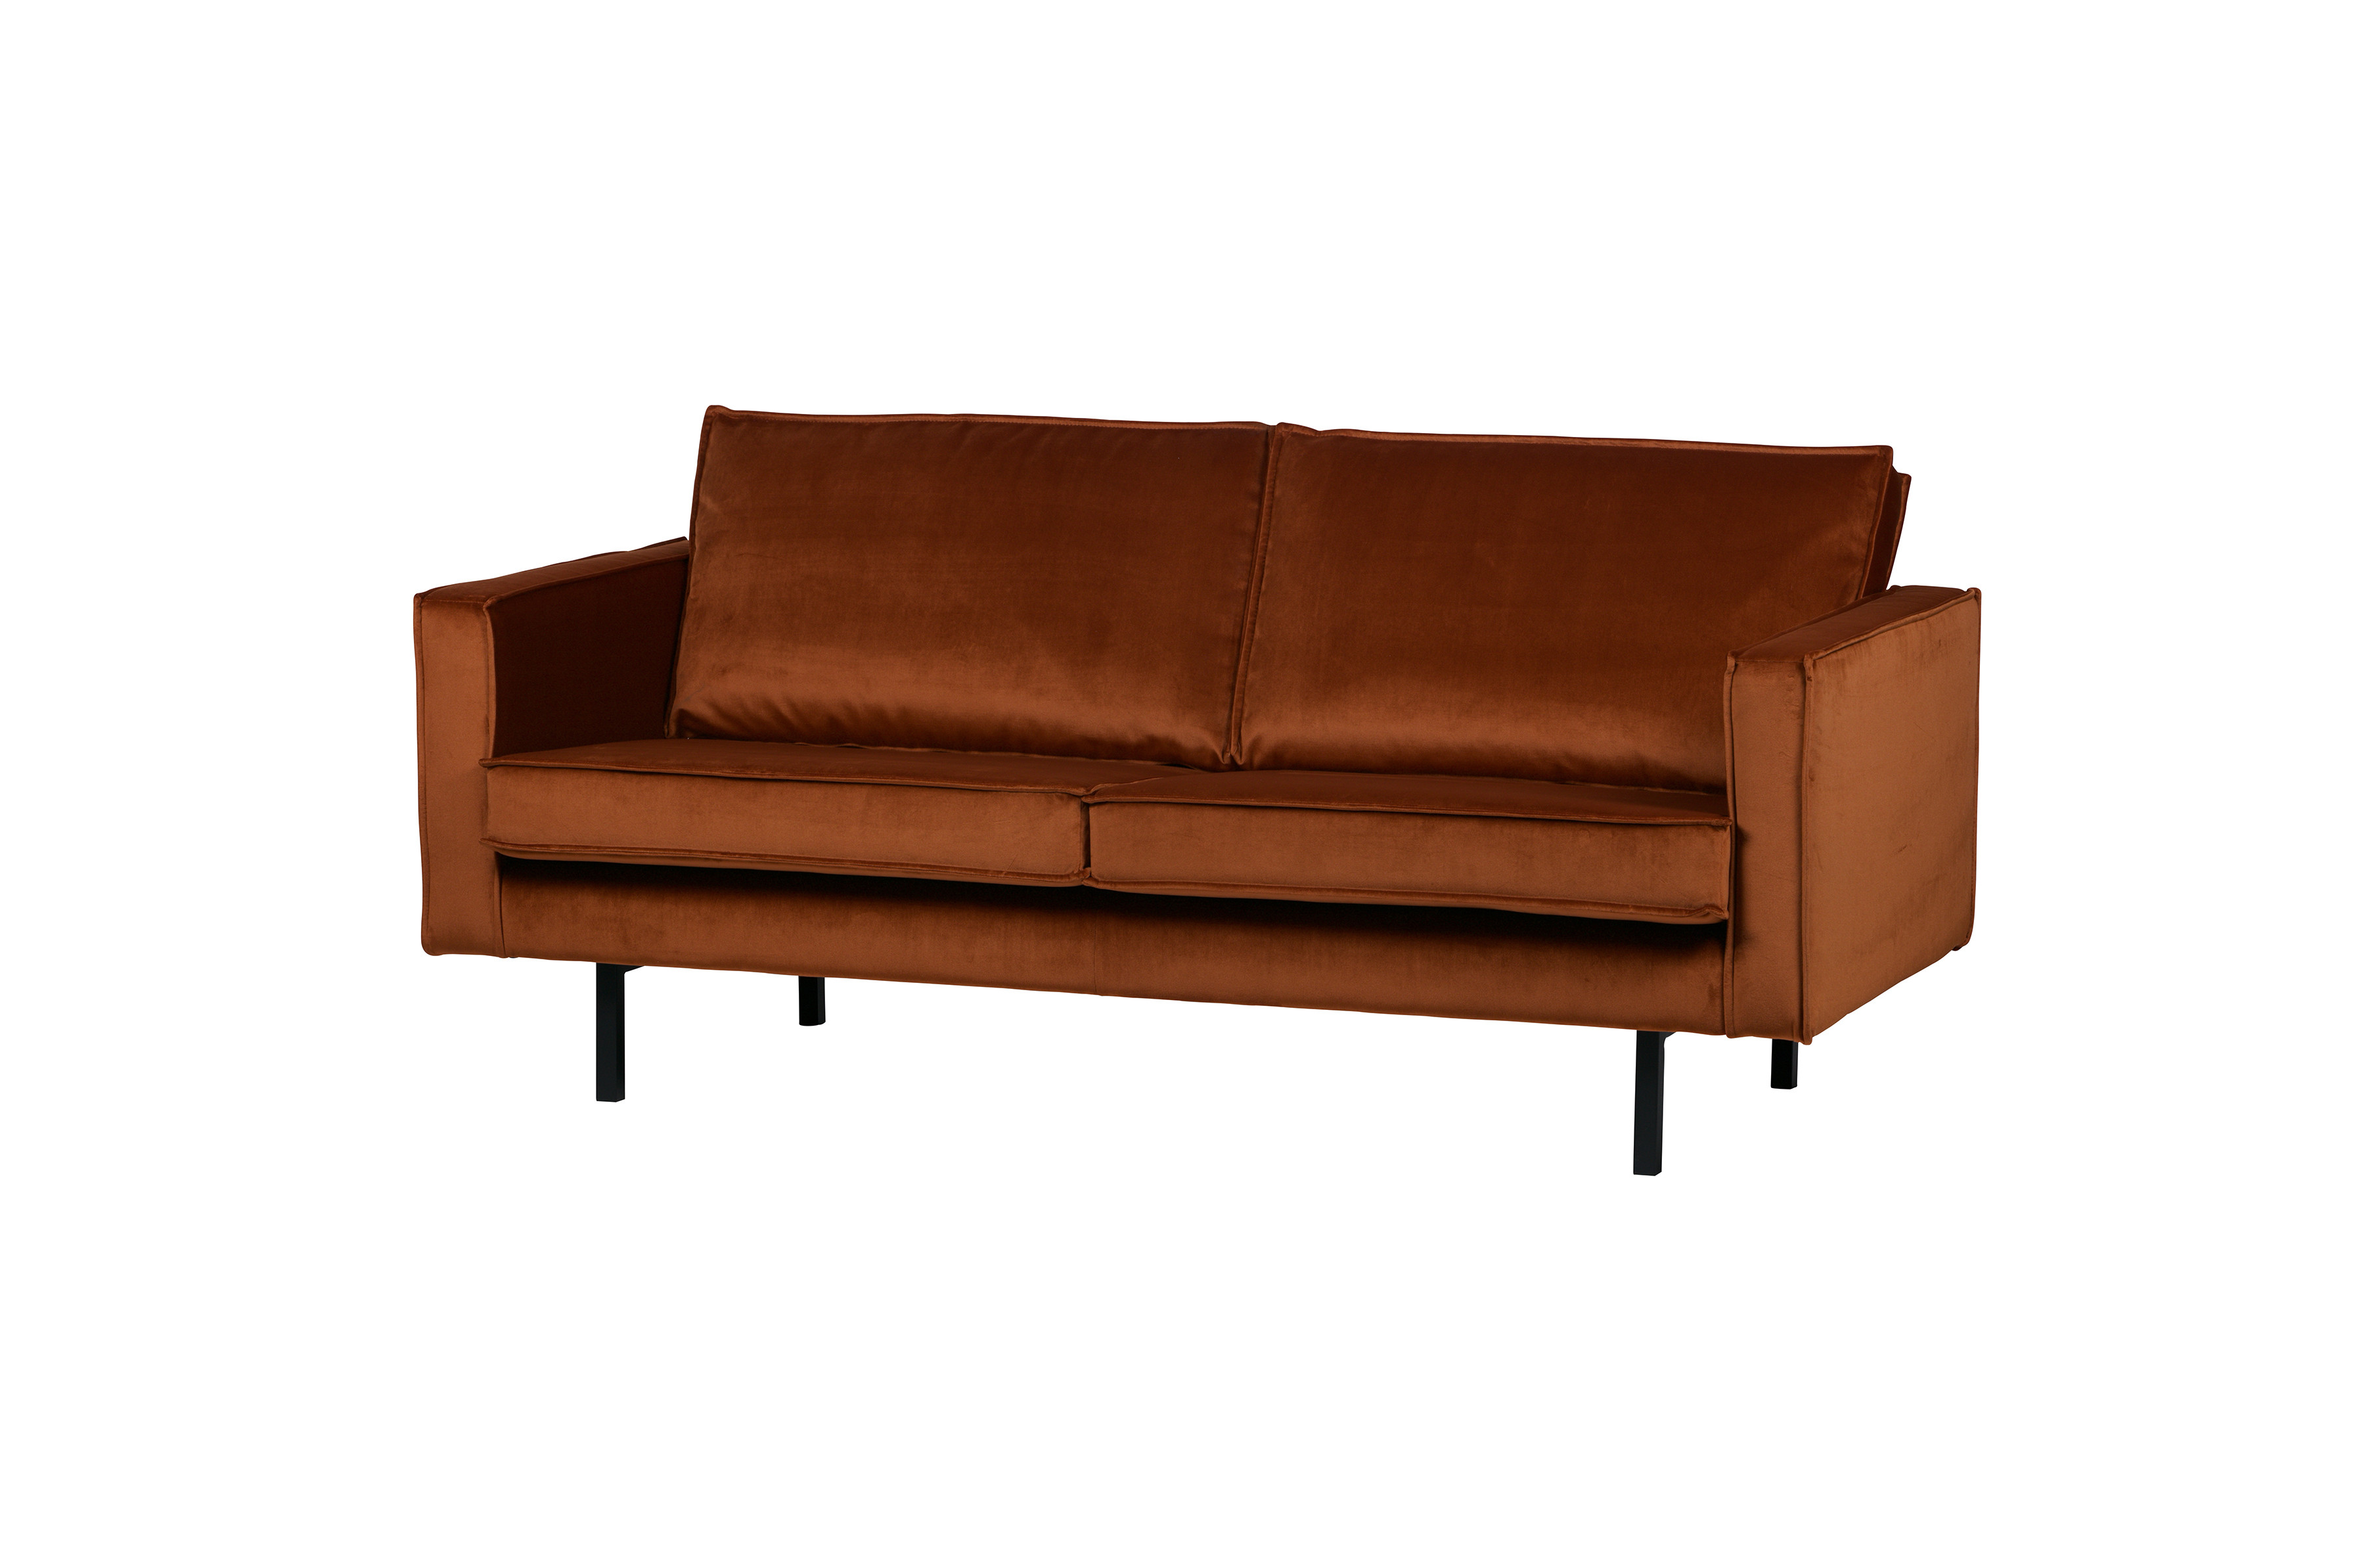 Rent a Sofa 25 seater Rodeo rust? Rent at KeyPro furniture rental!